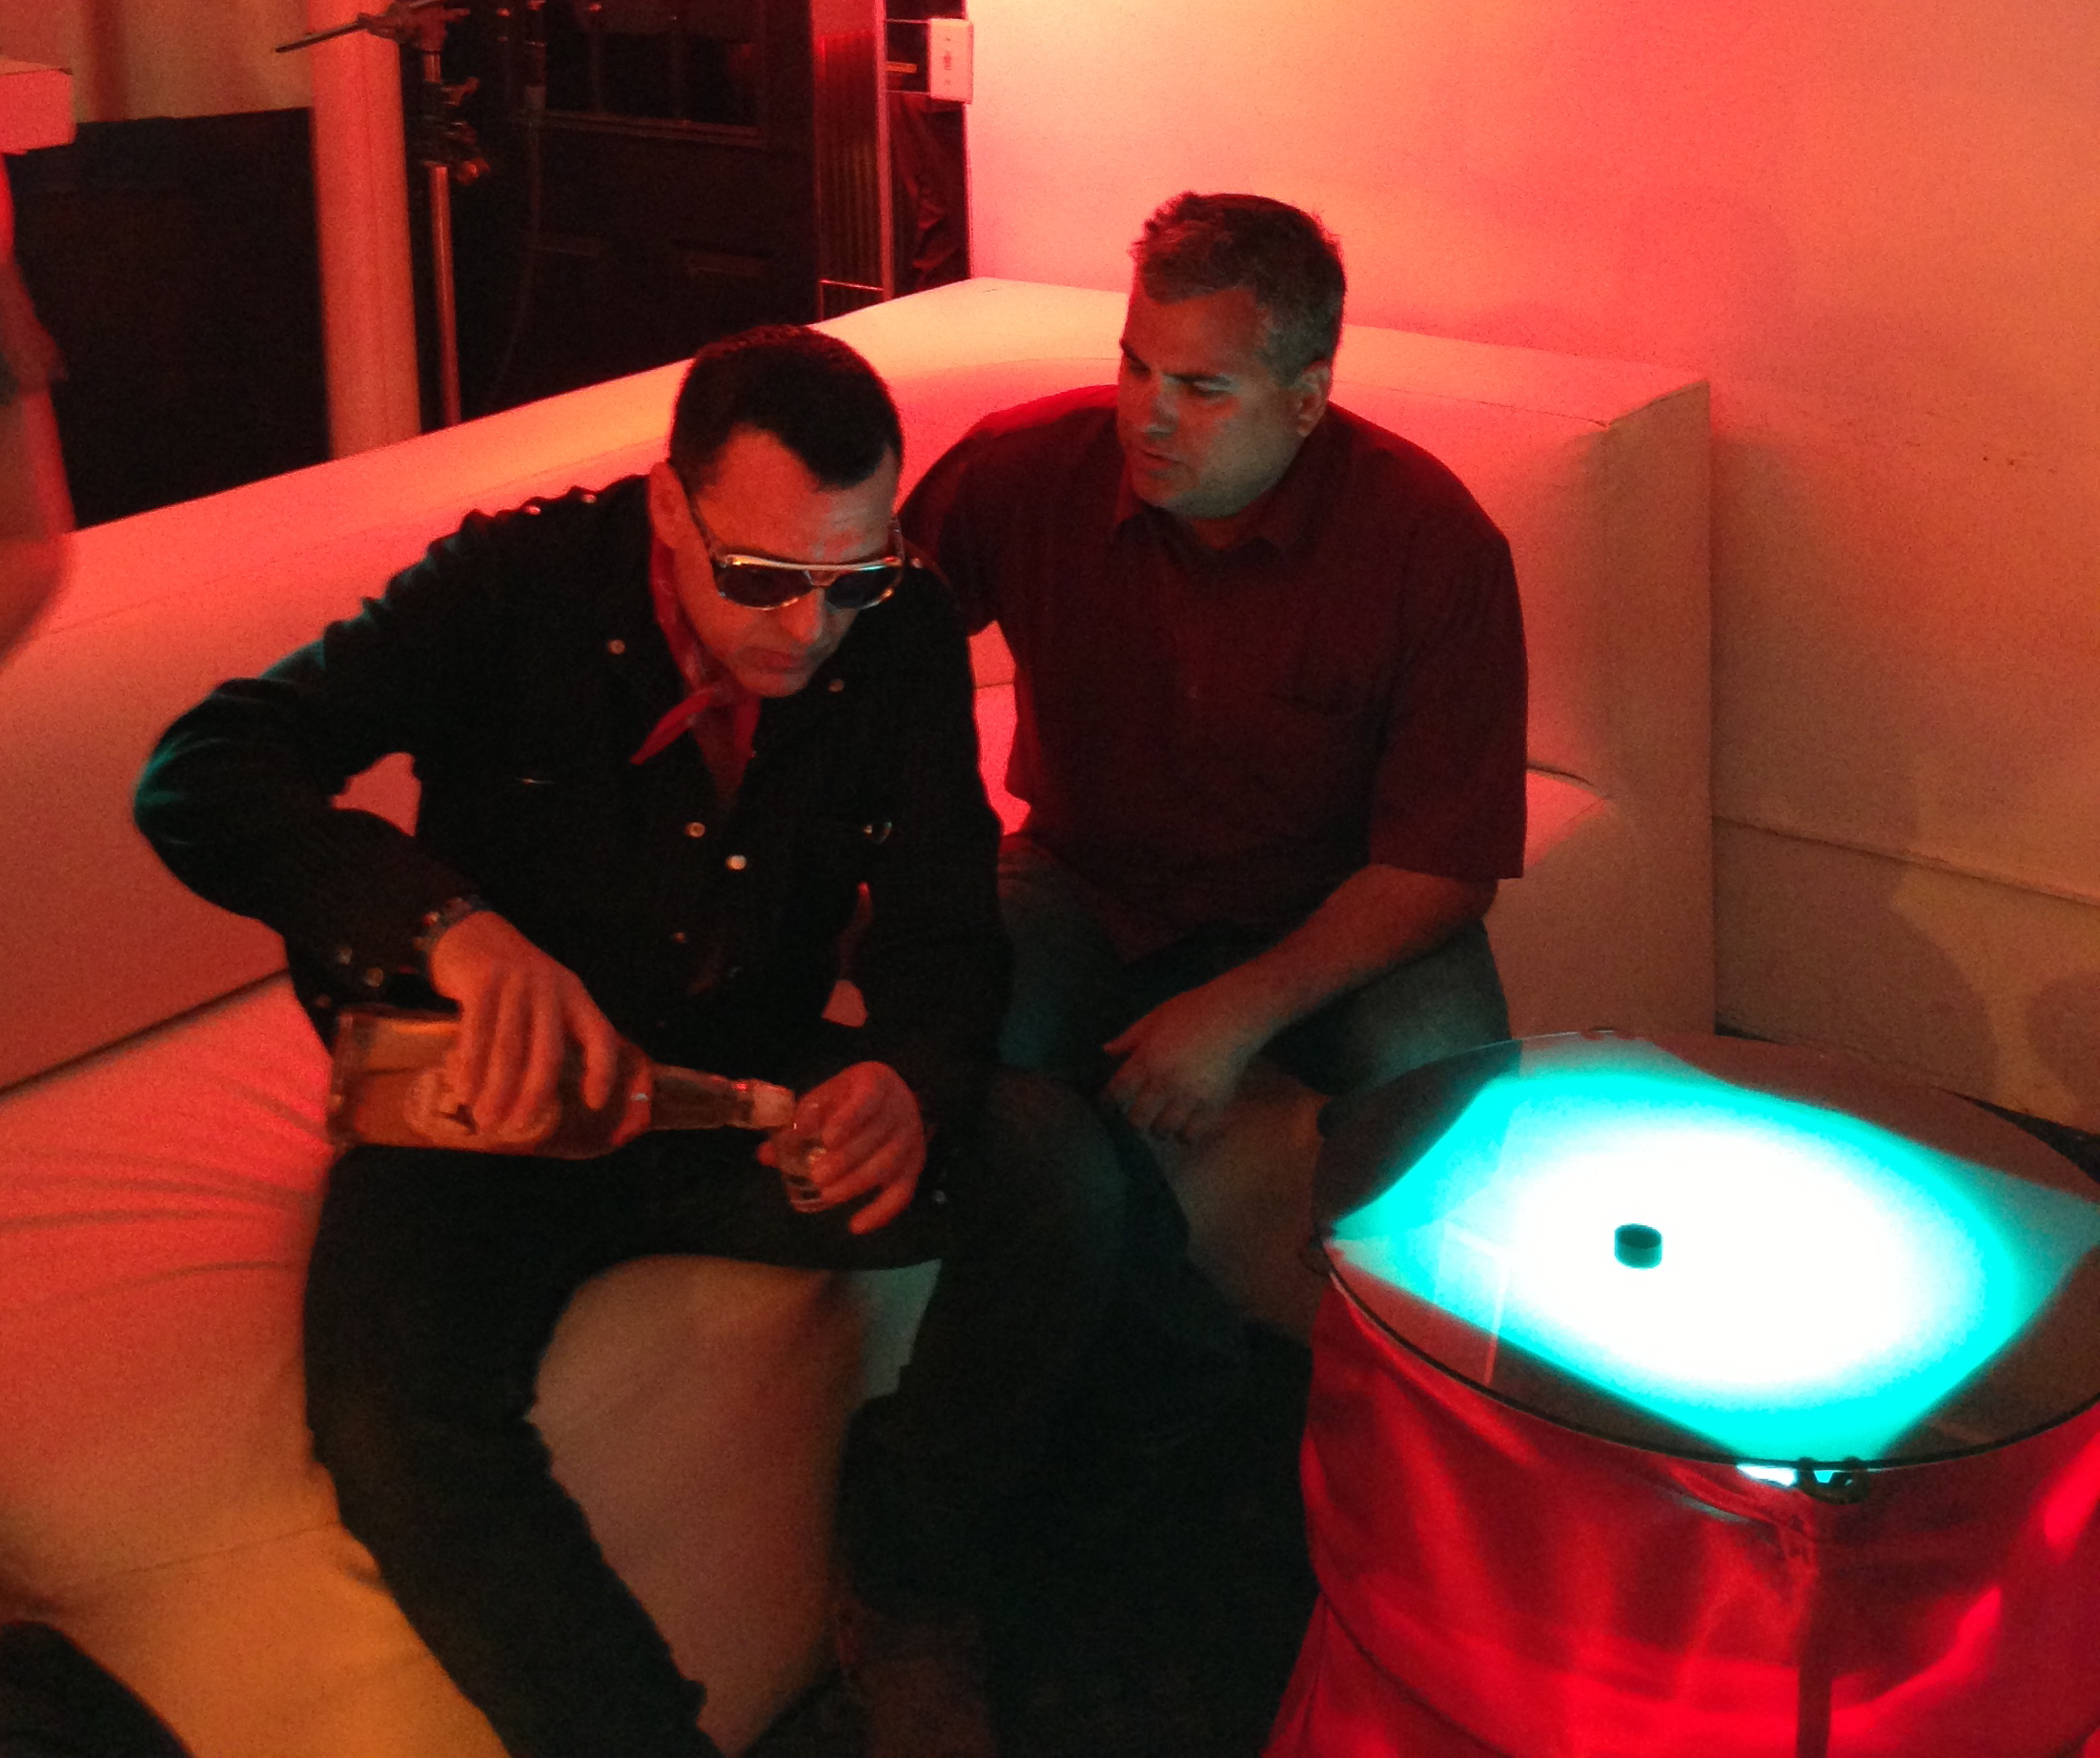 TOM SIZEMORE (and apple juice!) with director DANIEL ZIRILLI on the set of ROADRUN (Mexico, 2013).